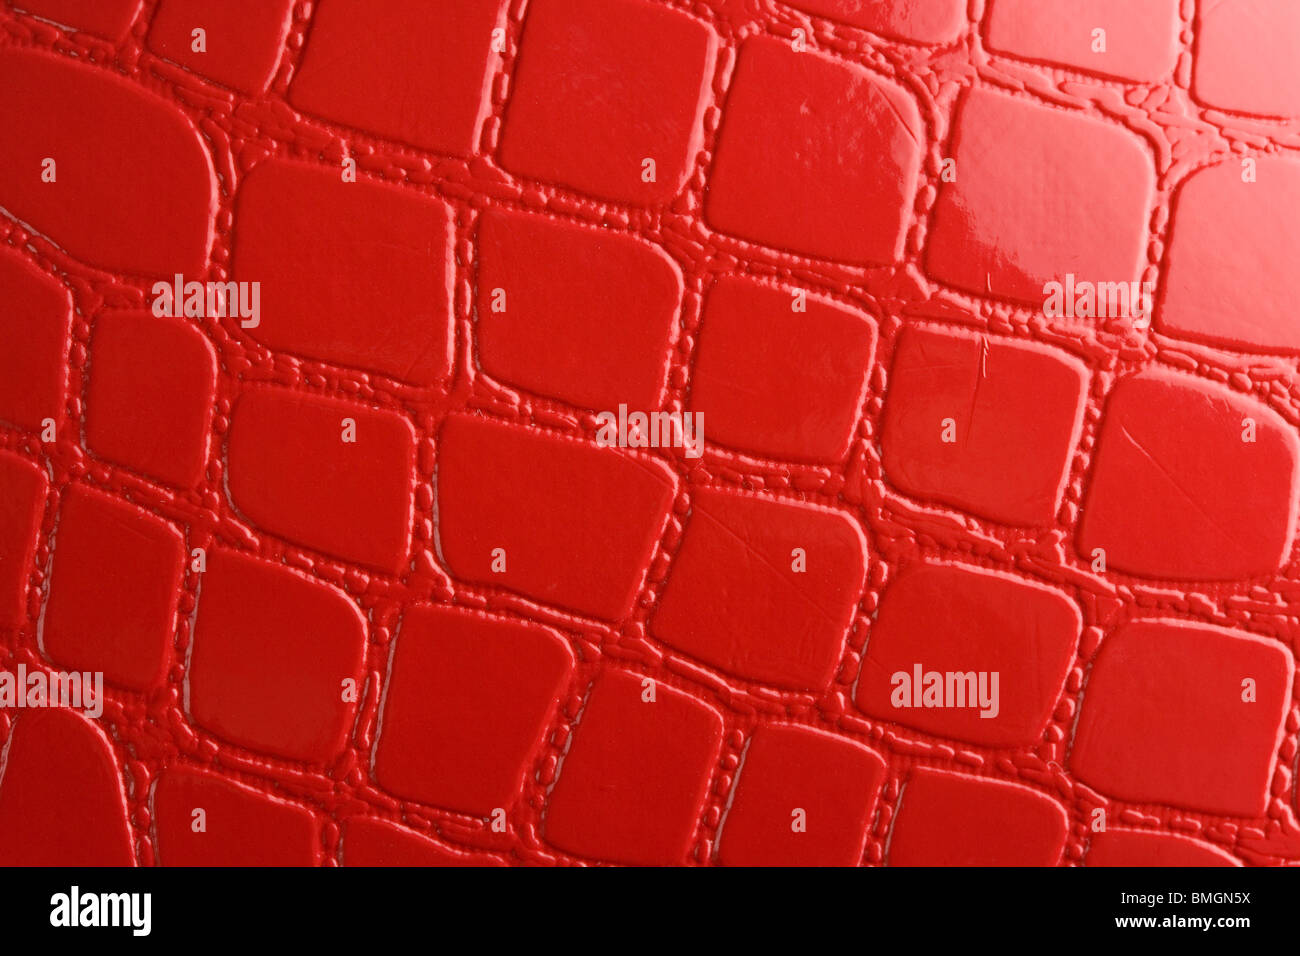 Red Leather Texture close up Stock Photo